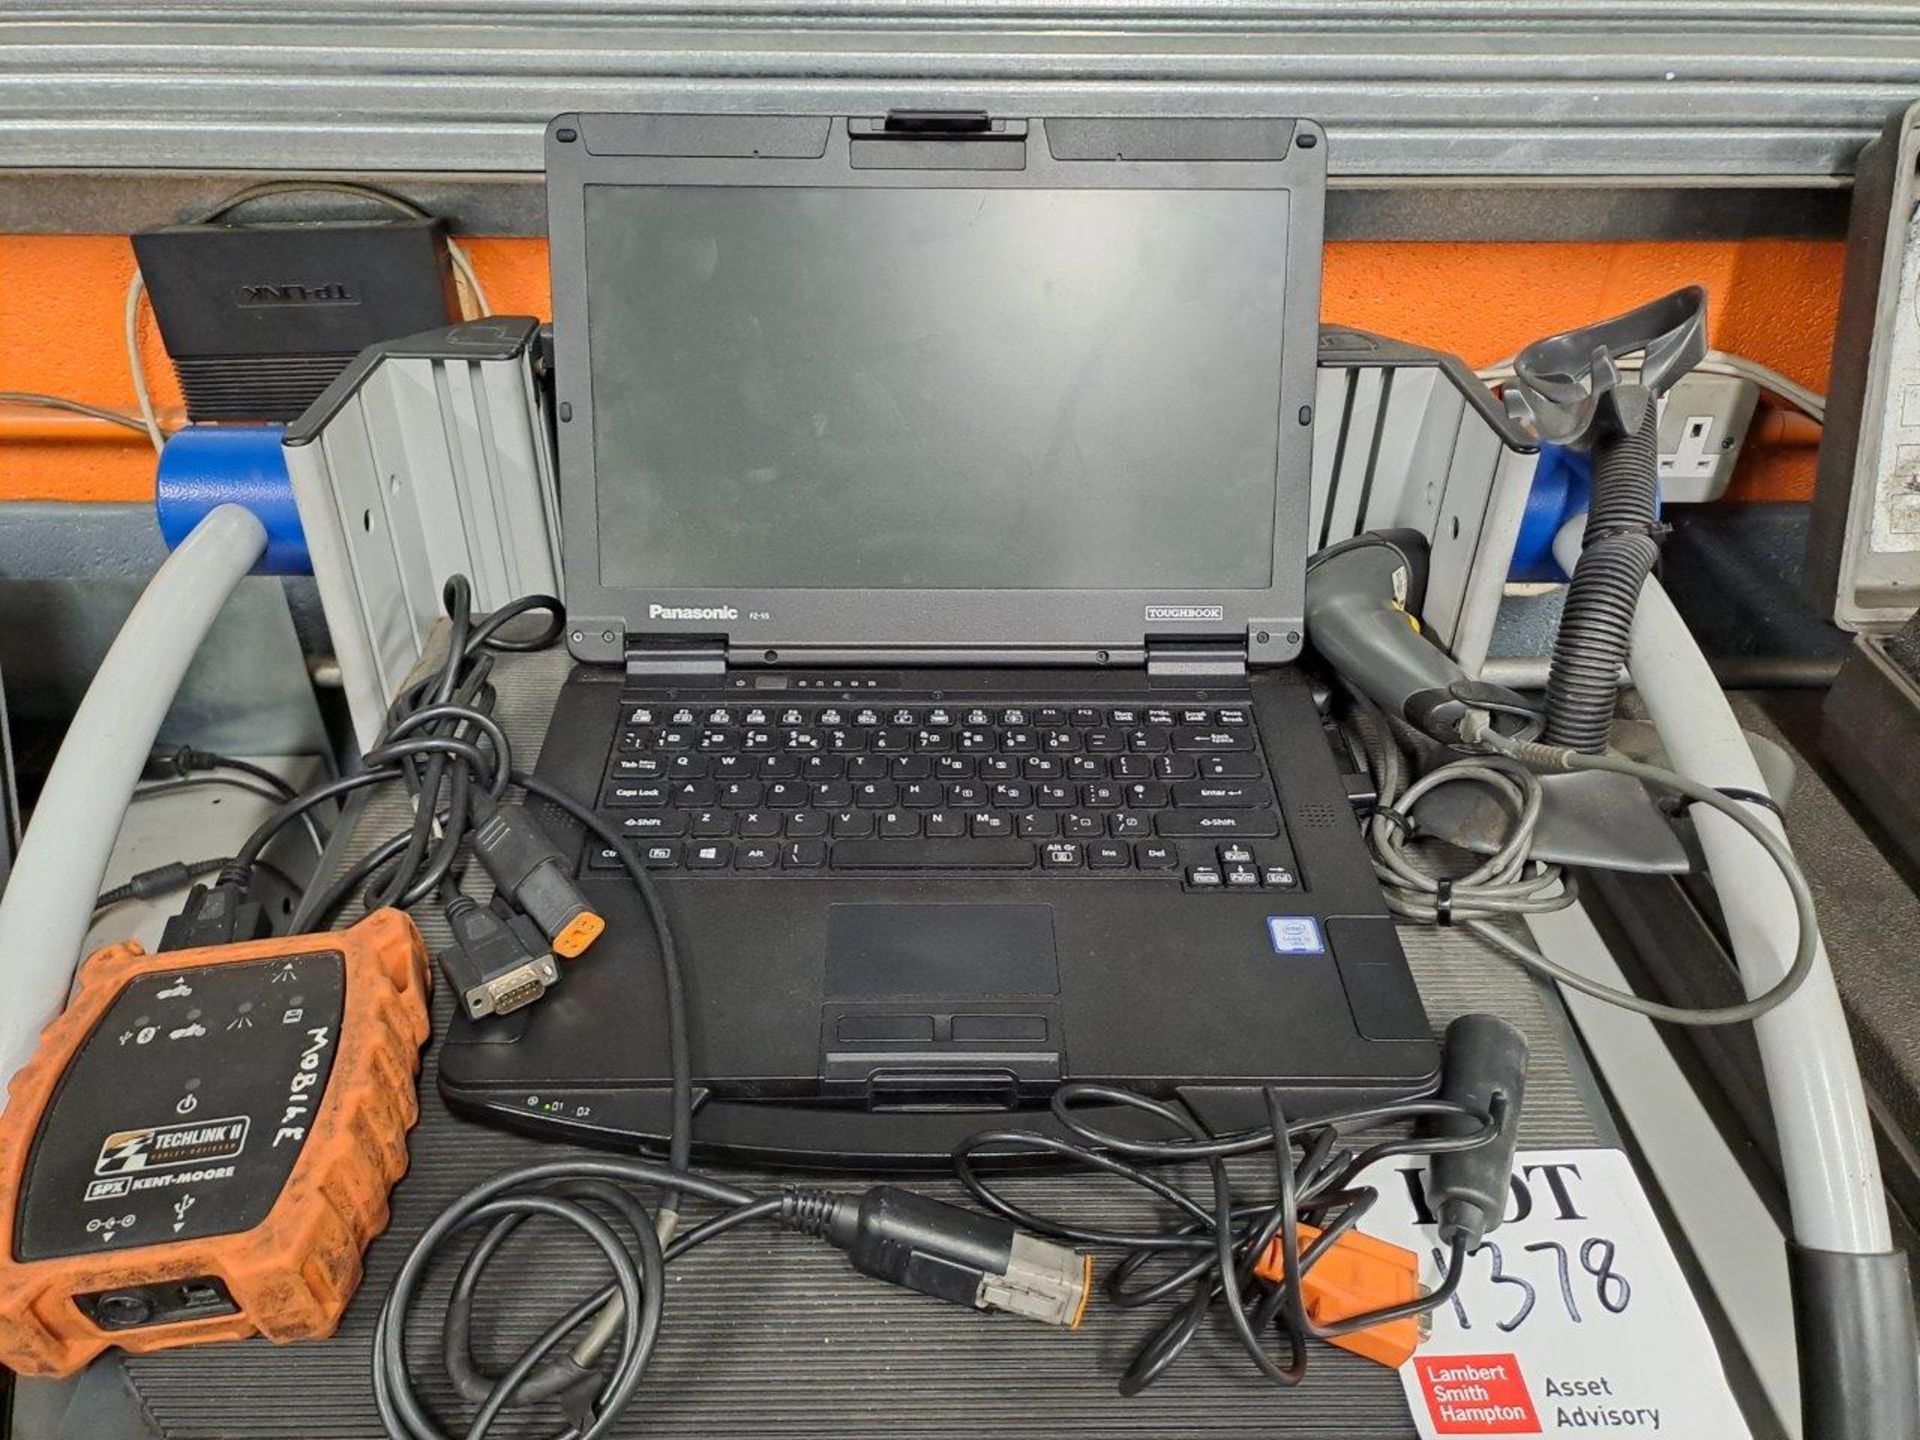 Panasonic FZ-55 Toughbook on Mobile - Techlink II Diagnostic and Mobile Stand - Image 3 of 6